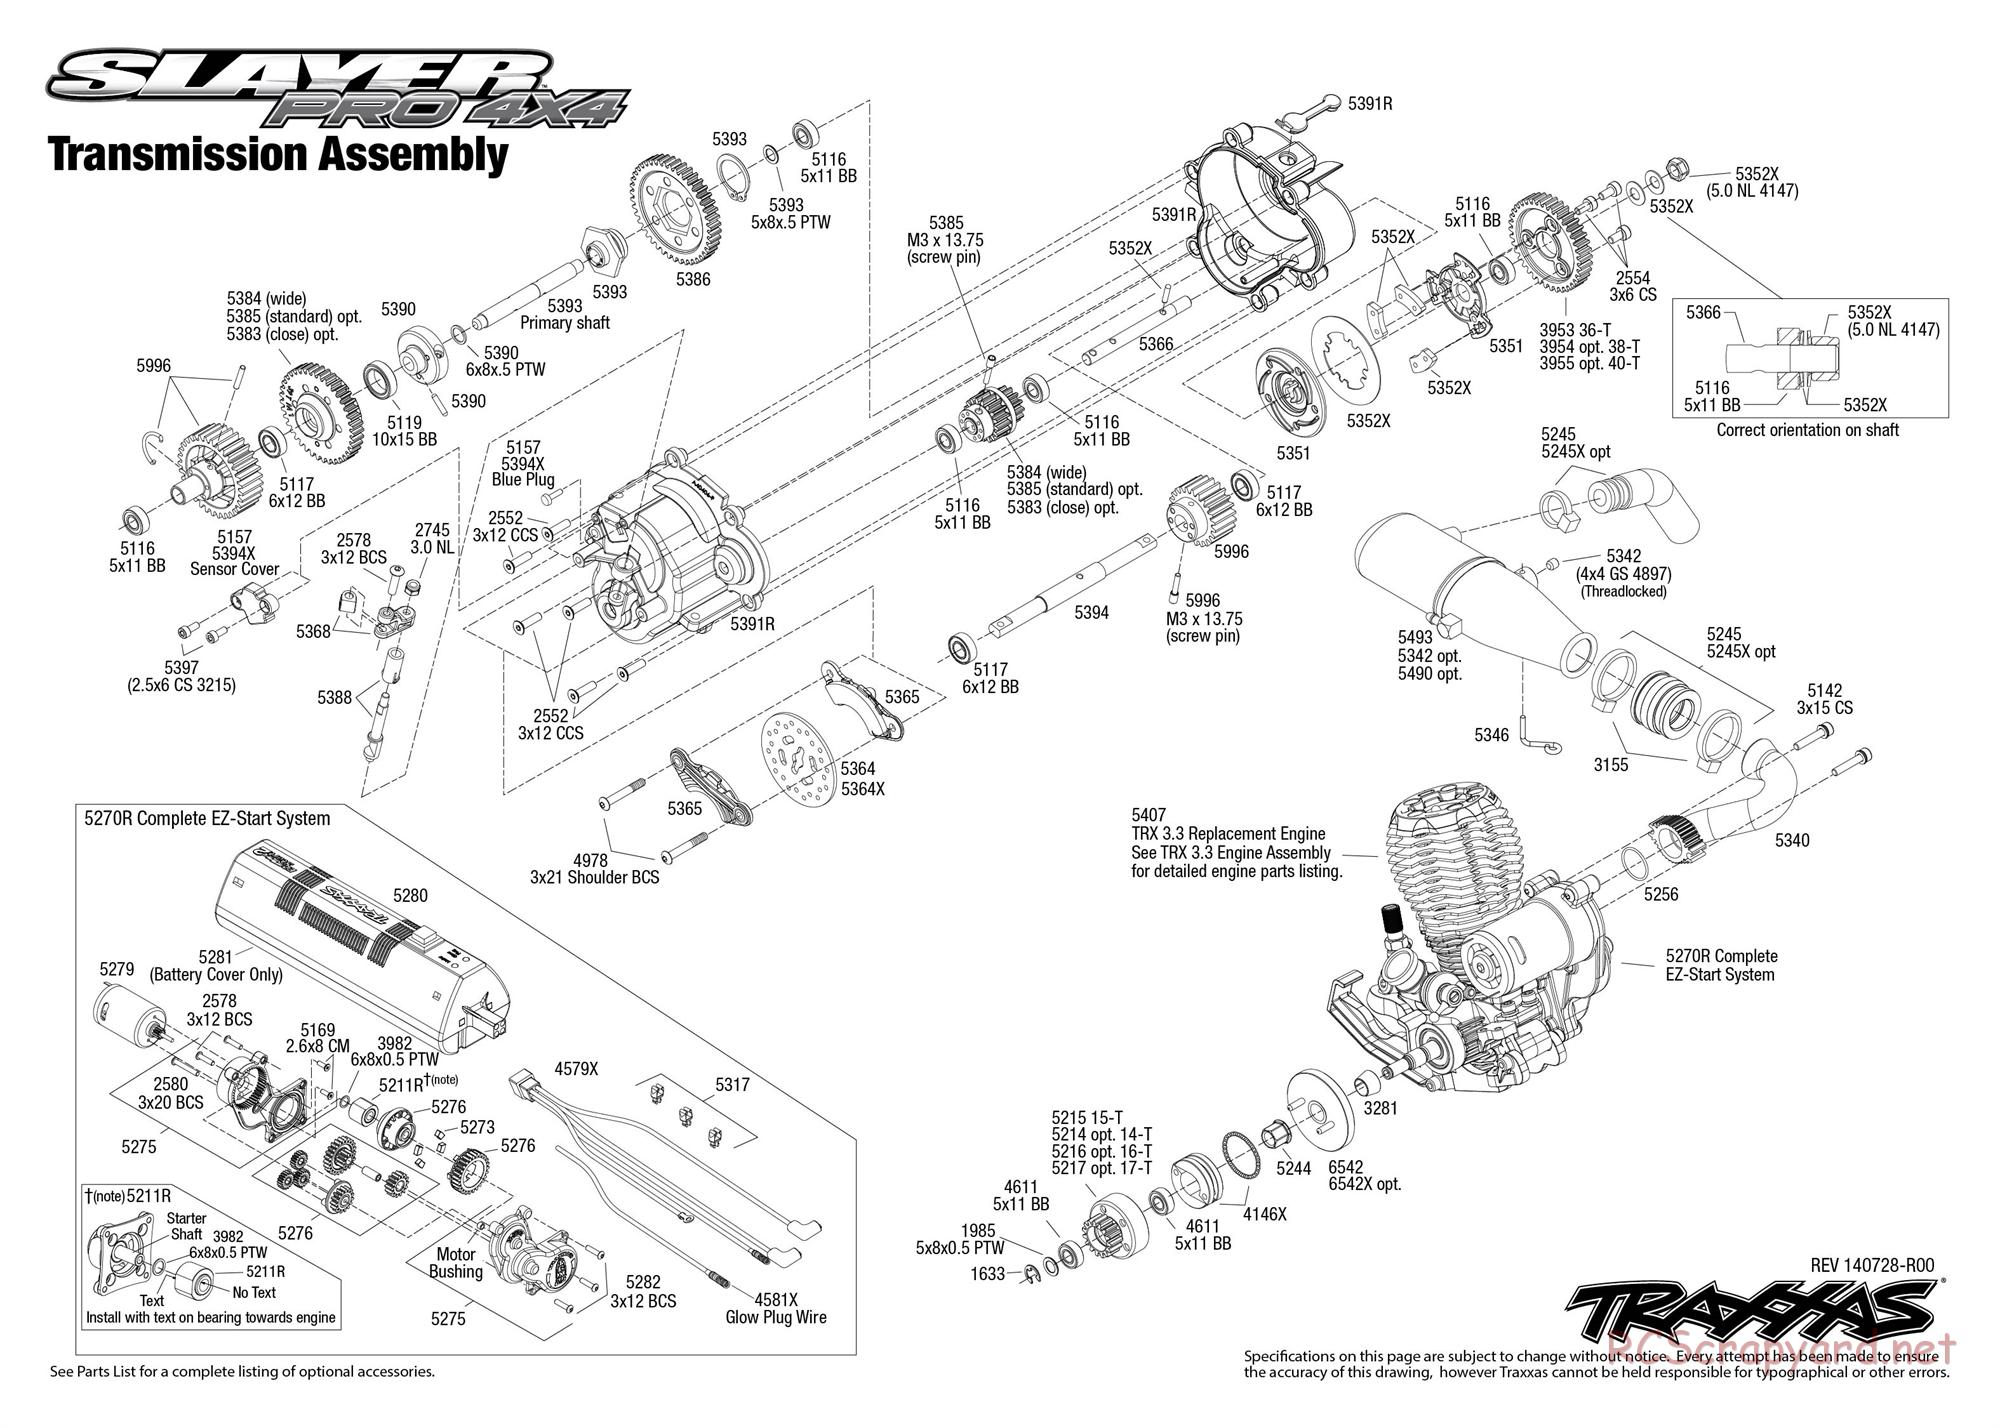 Traxxas - Slayer Pro 4x4 (2014) - Exploded Views - Page 7